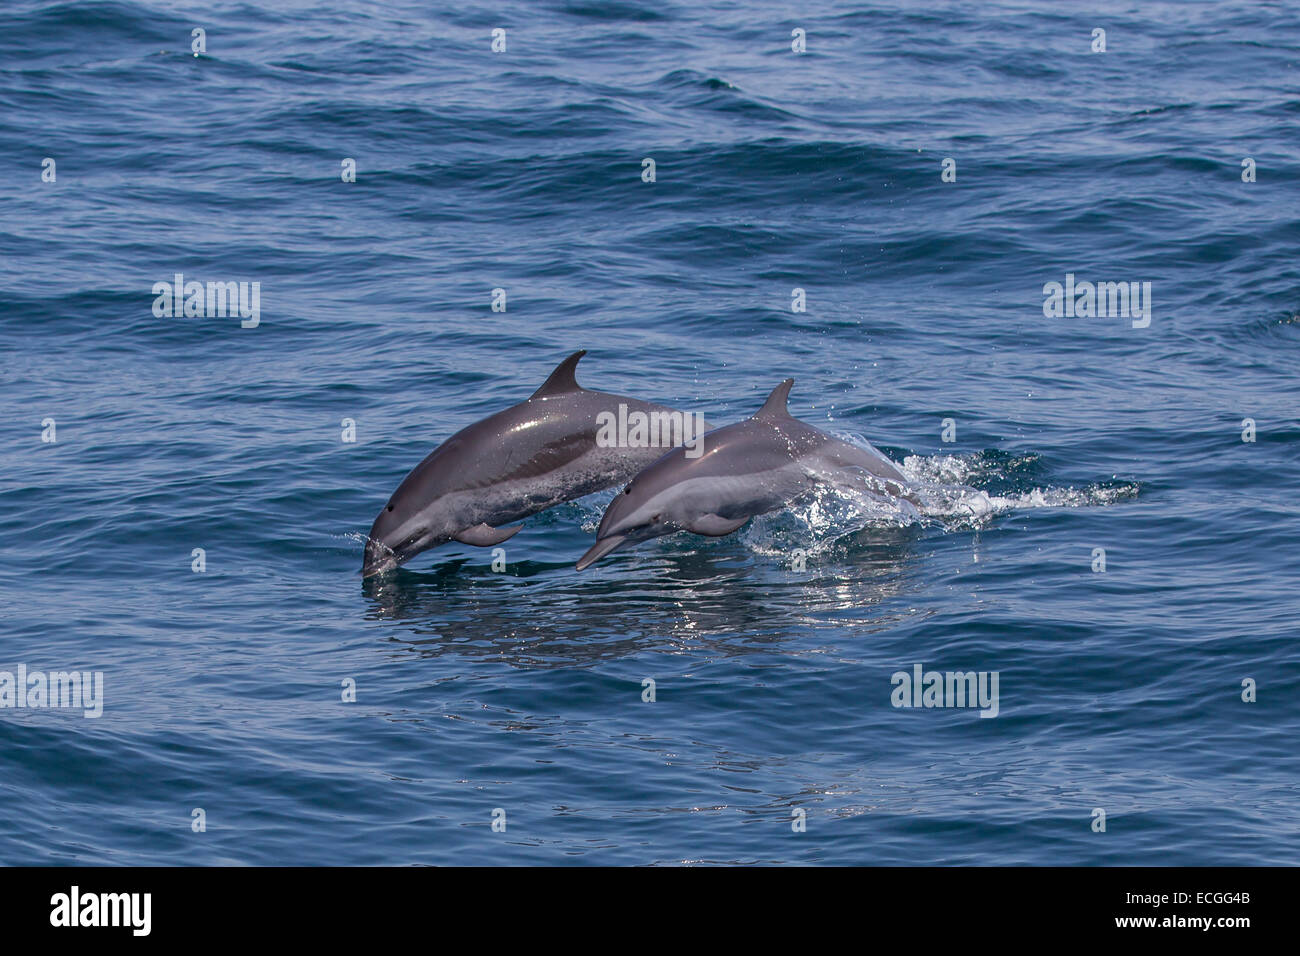 Pantropical Spotted Dolphins, Stenella attenuata, Schlankdelfine, adult and juvenile leaping together, Indonesia Stock Photo